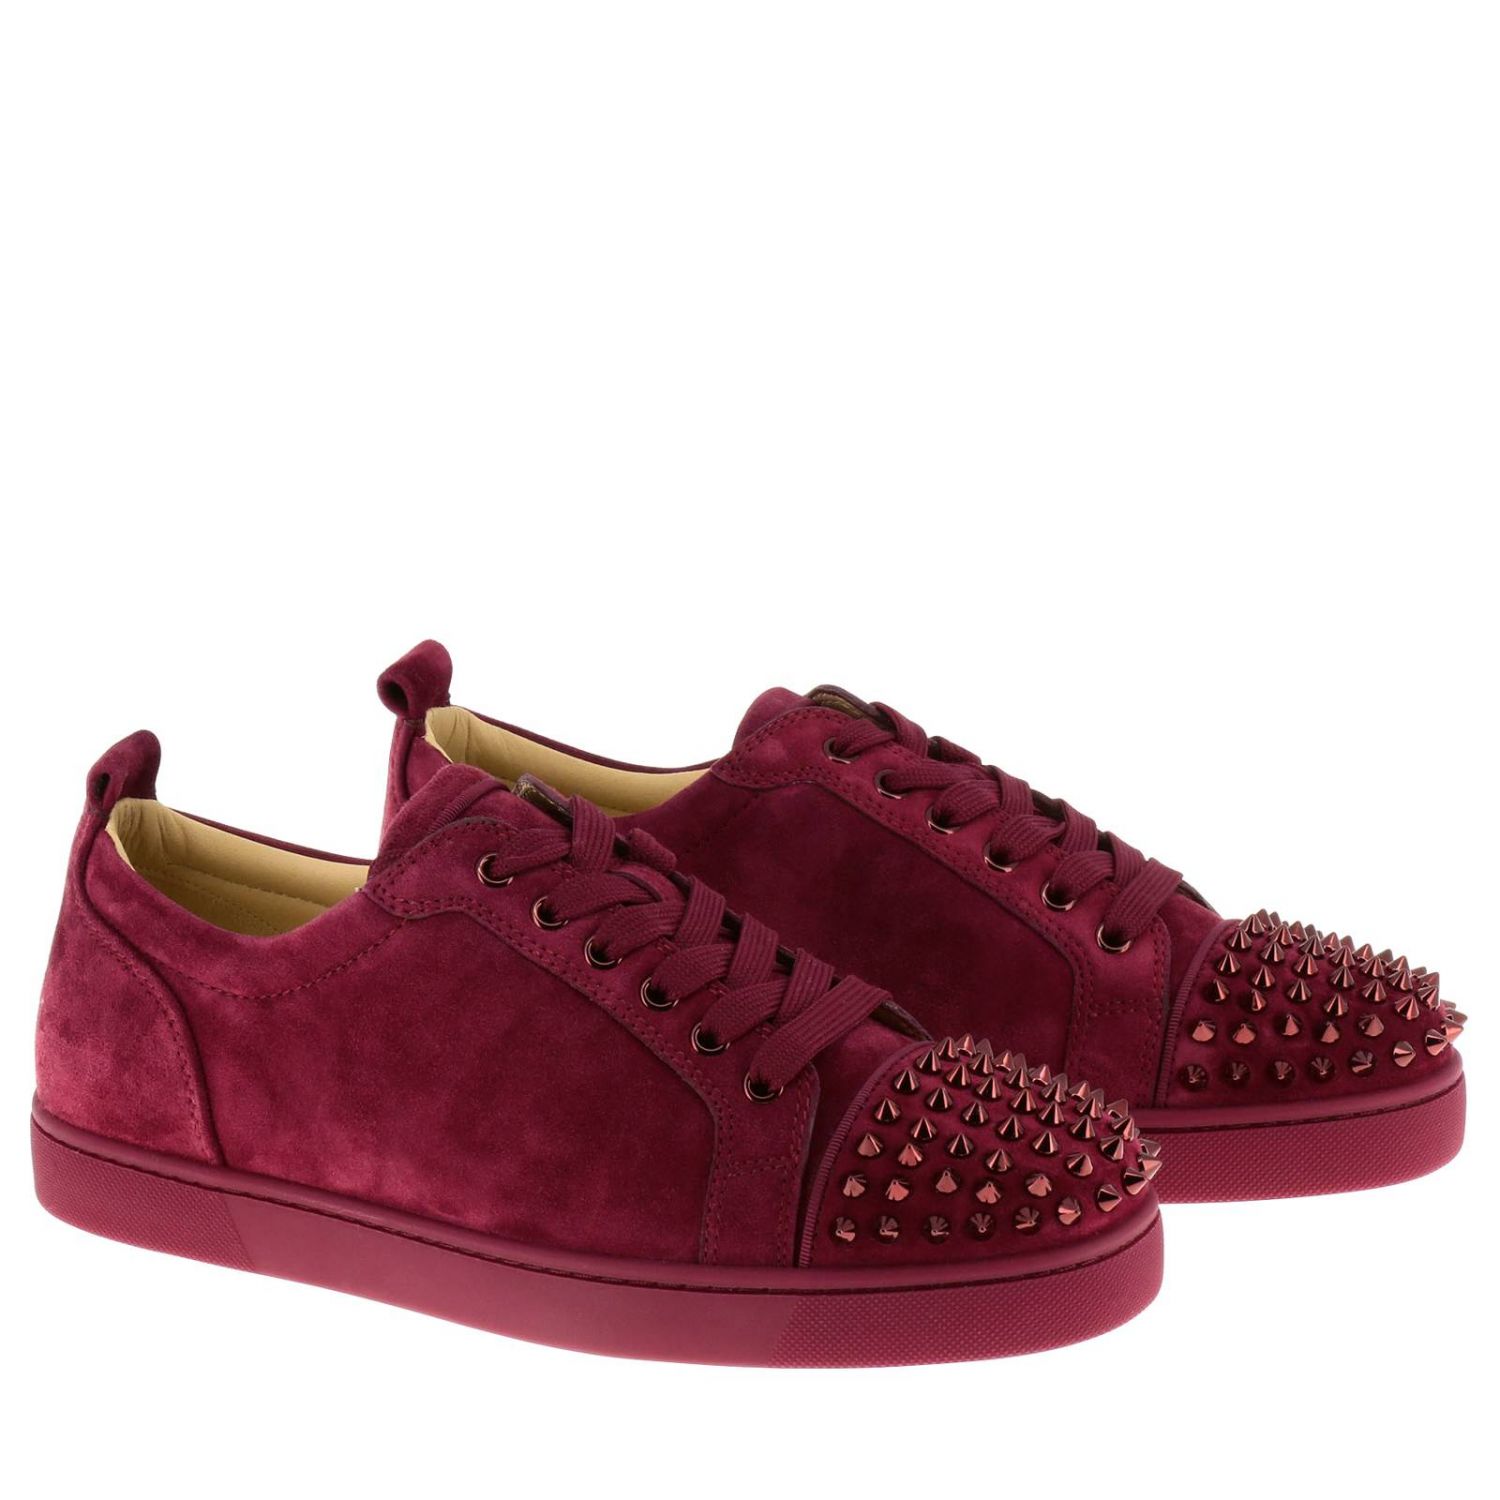 Shoes Men Christian Louboutin Trainers Christian Louboutin Men Wine Trainers Christian Louboutin Giglio Uk